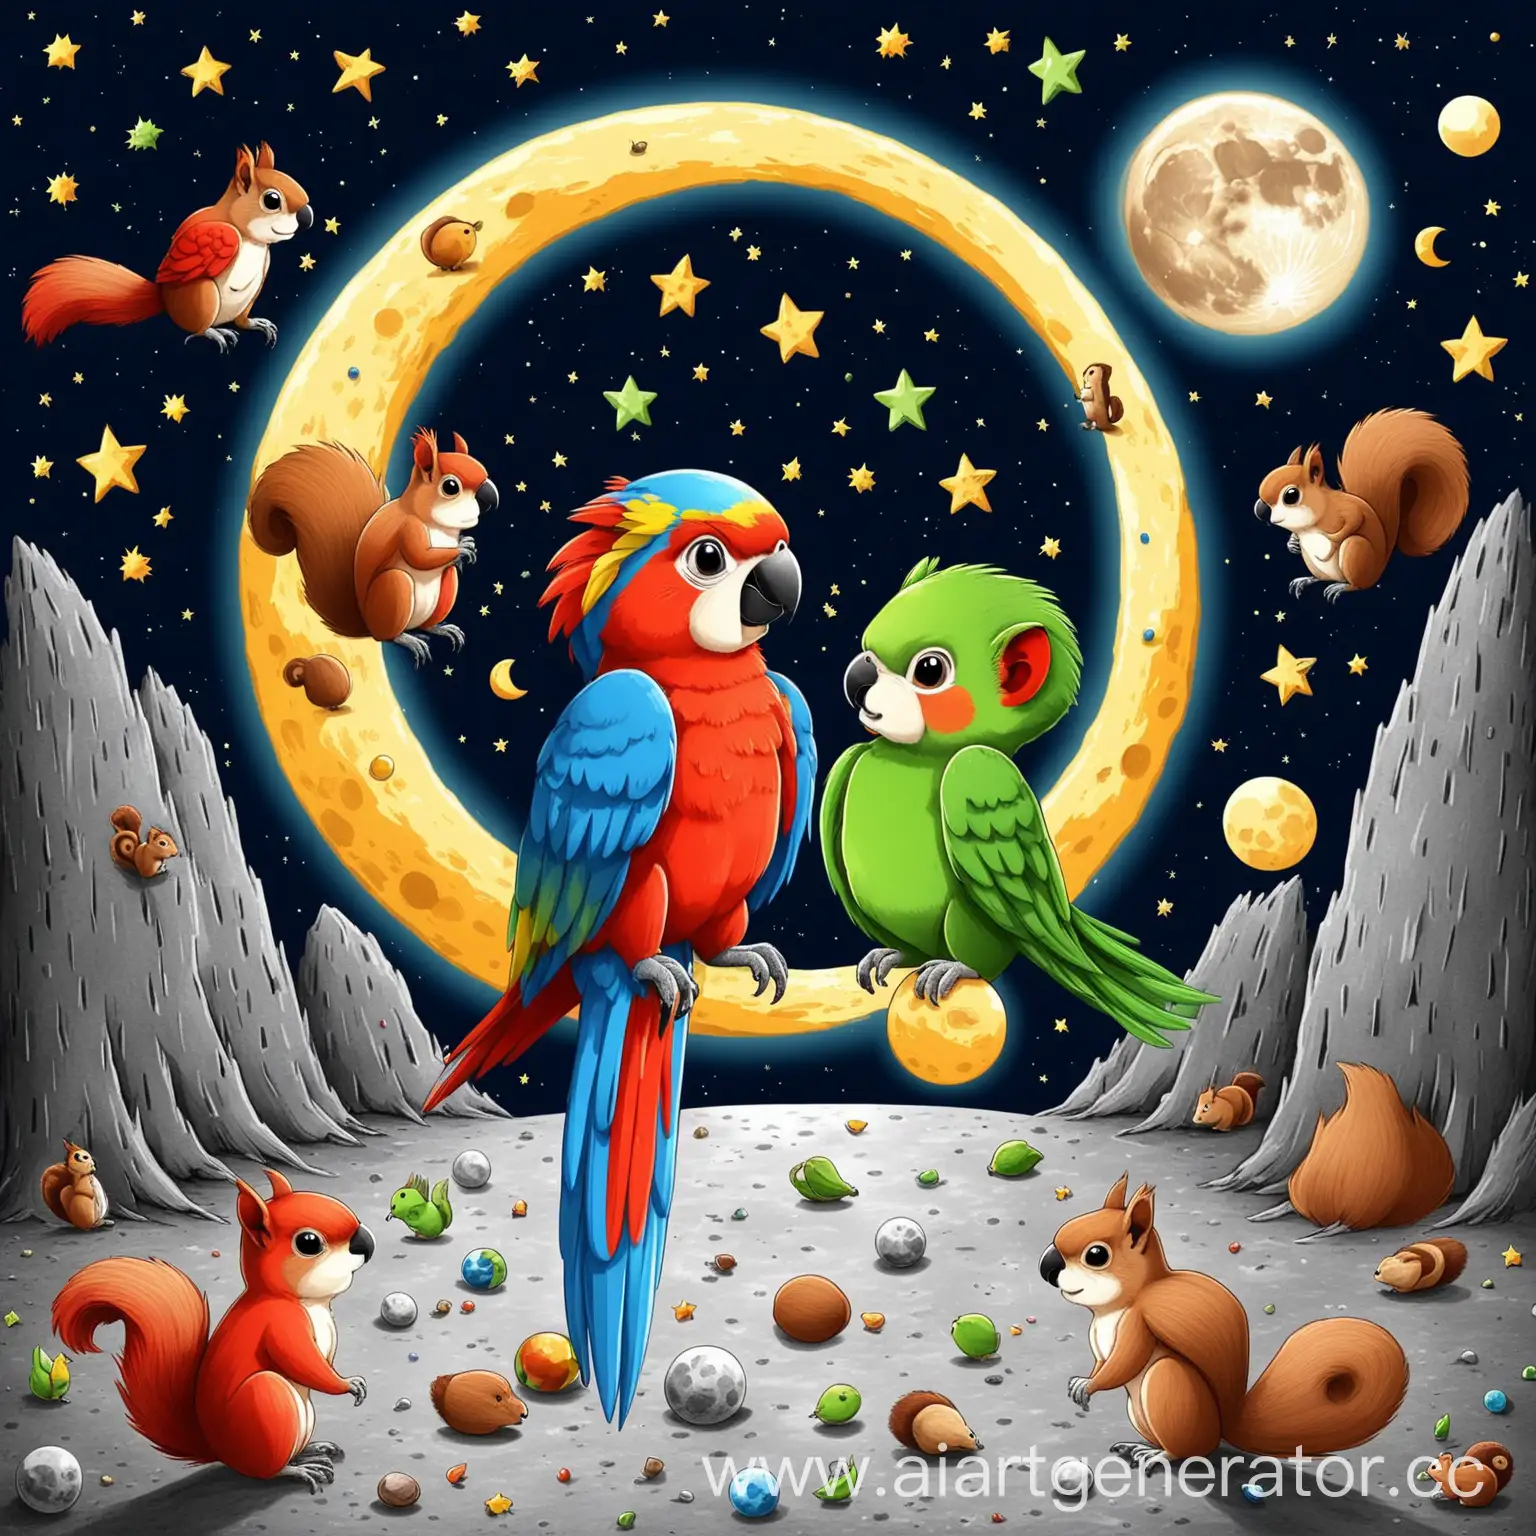 Colorful-Parrot-and-Curious-Squirrel-Exploring-the-Moons-Surface